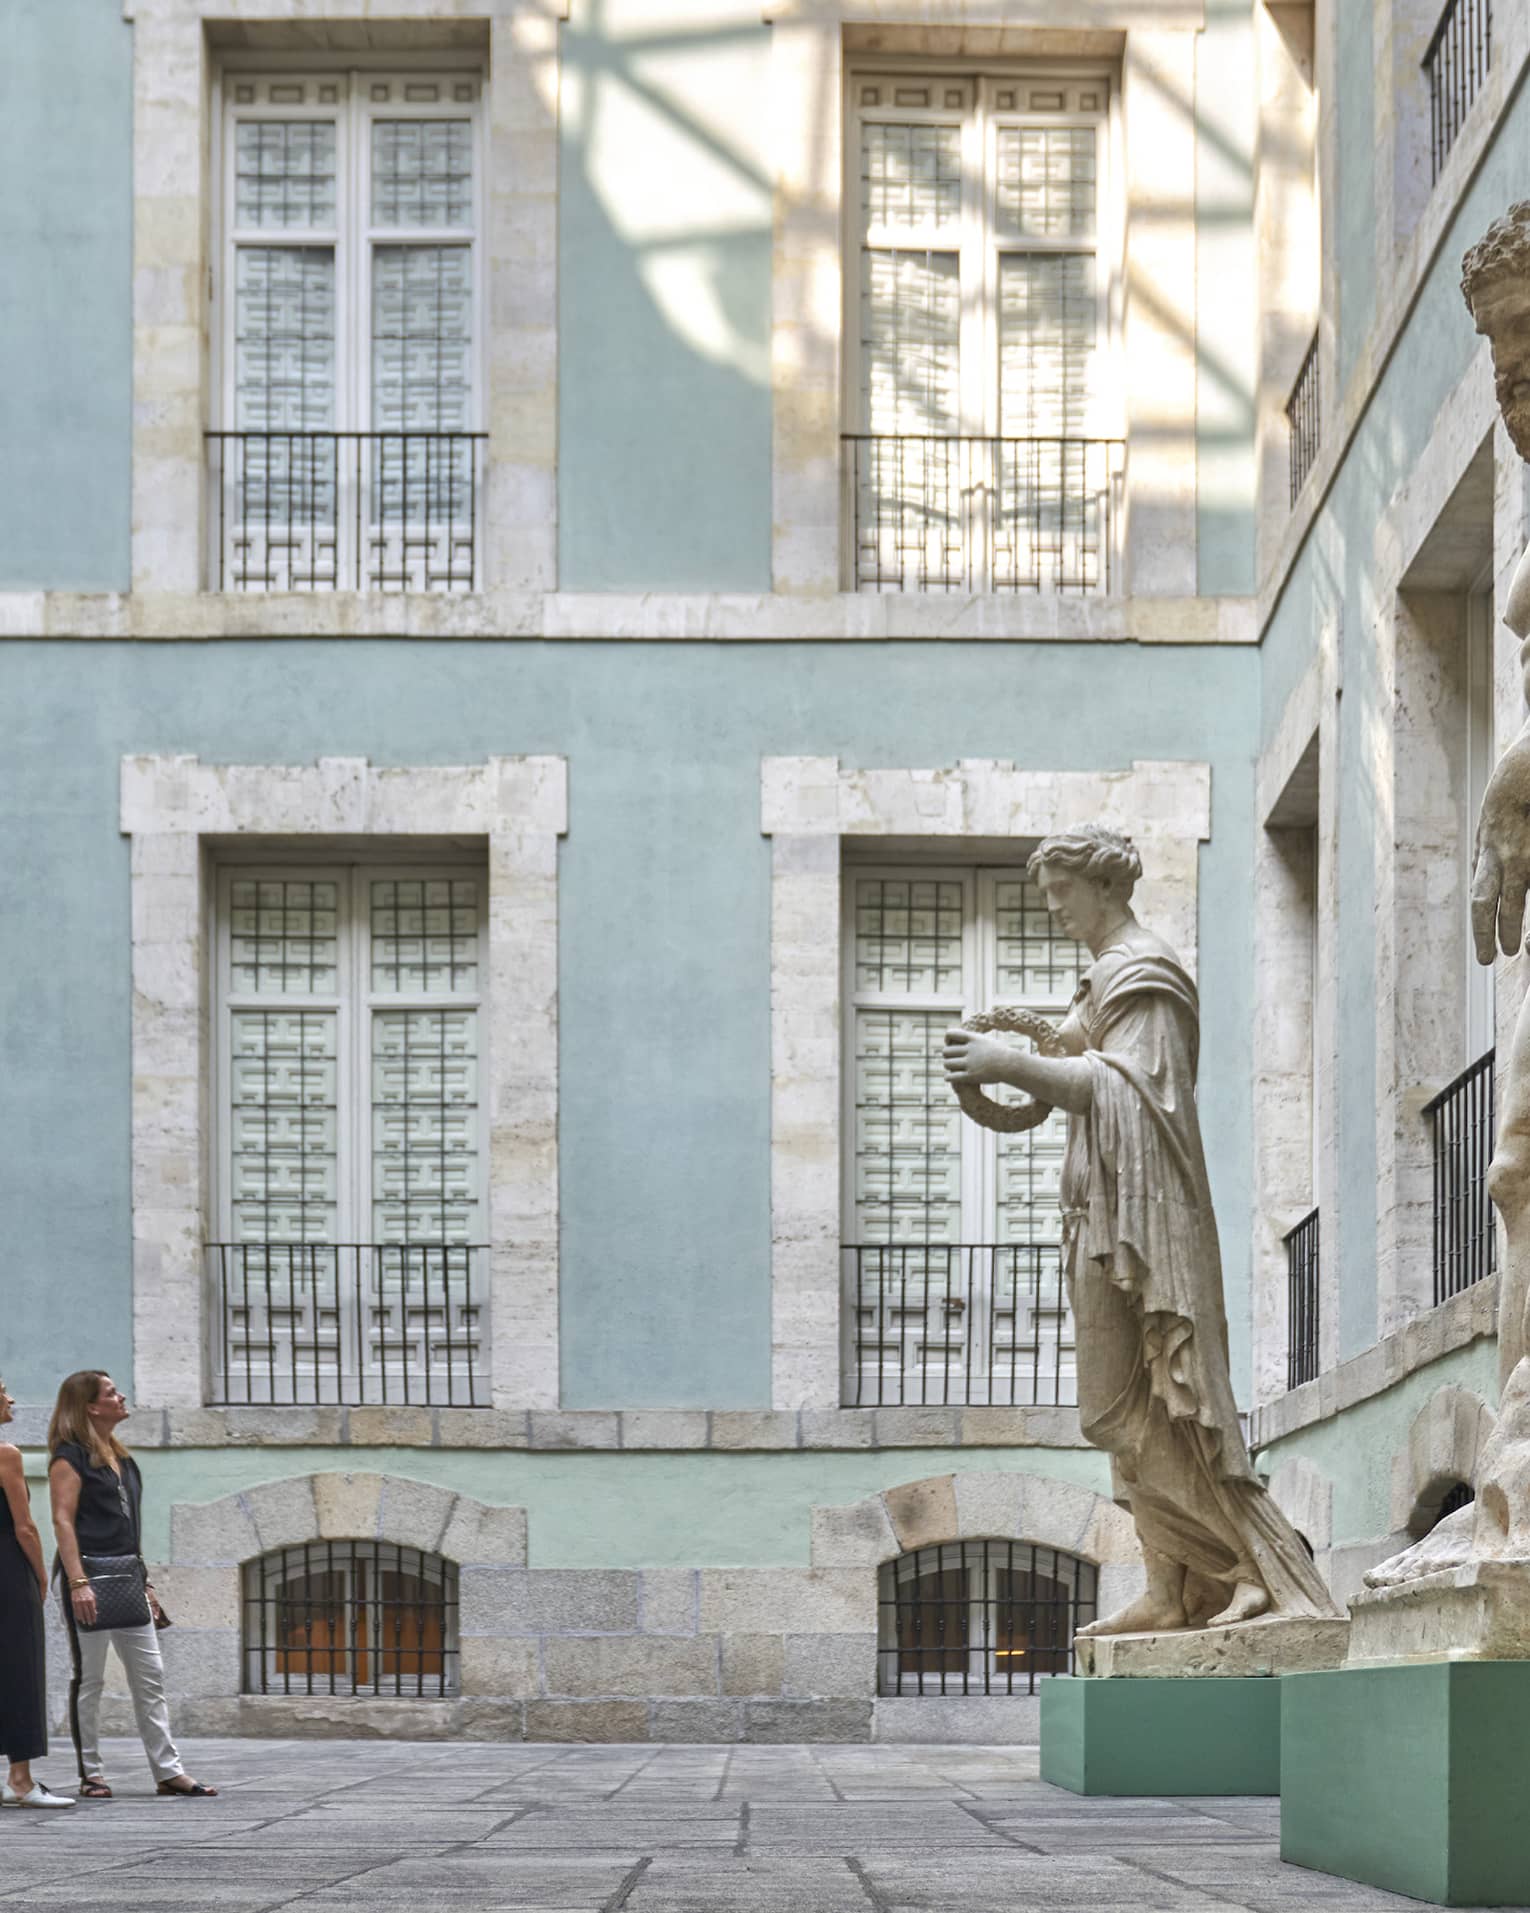 Two women observe large sculptures in a courtyard surrounded by light blue building